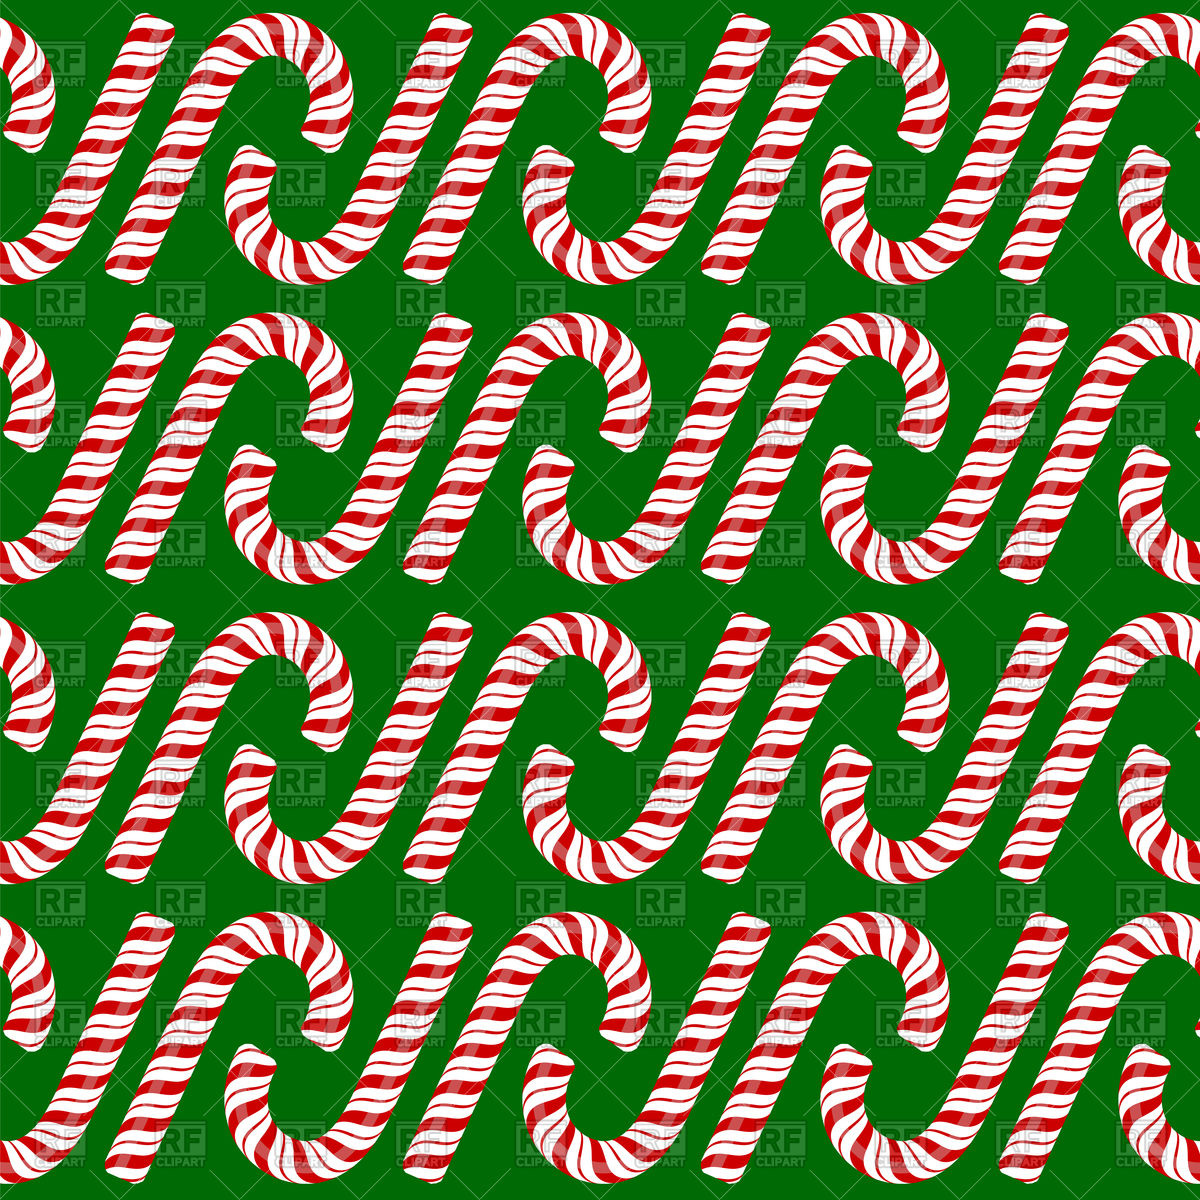 Candy canes on green background Vector Image 90907